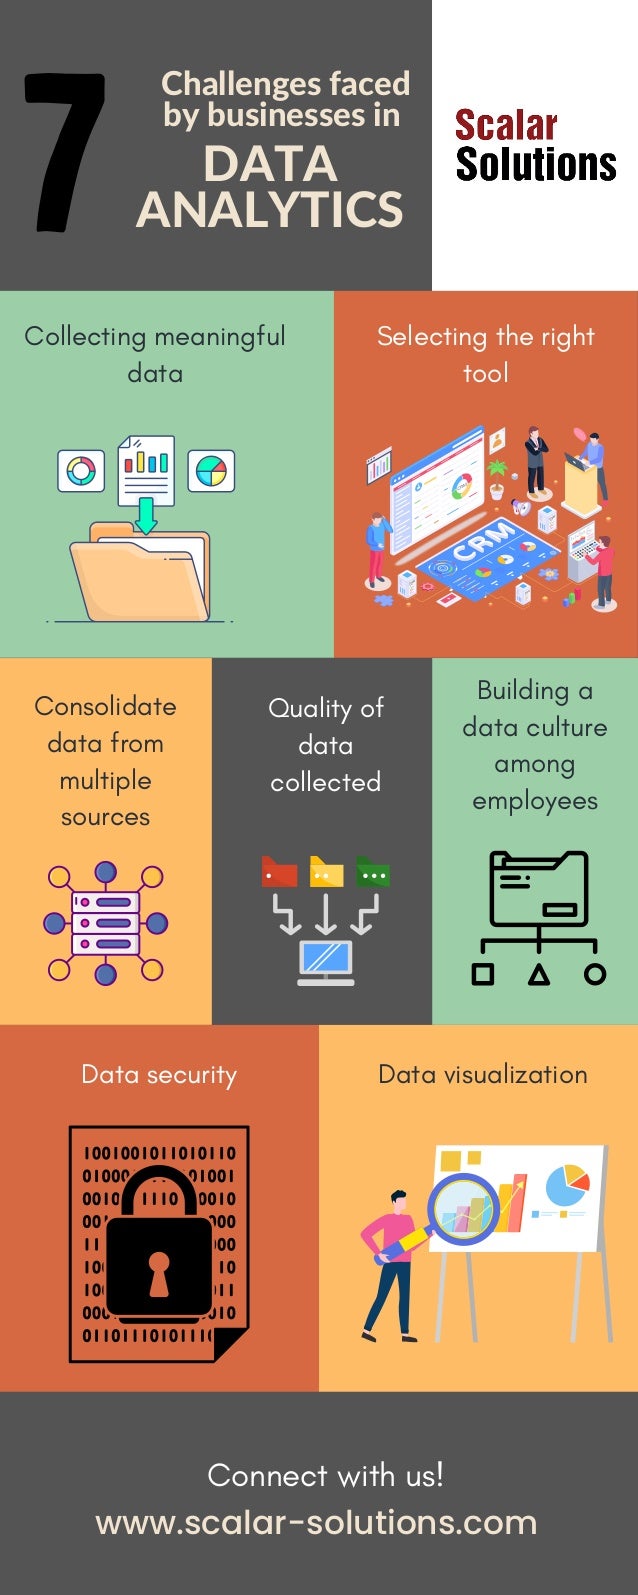 Quality of
data
collected
Collecting meaningful
data
Challenges faced
by businesses in
Data visualization
Consolidate
data from
multiple
sources
Data security
DATA
ANALYTICS
7
Selecting the right
tool
Building a
data culture
among
employees
www.scalar-solutions.com
Connect with us!
 